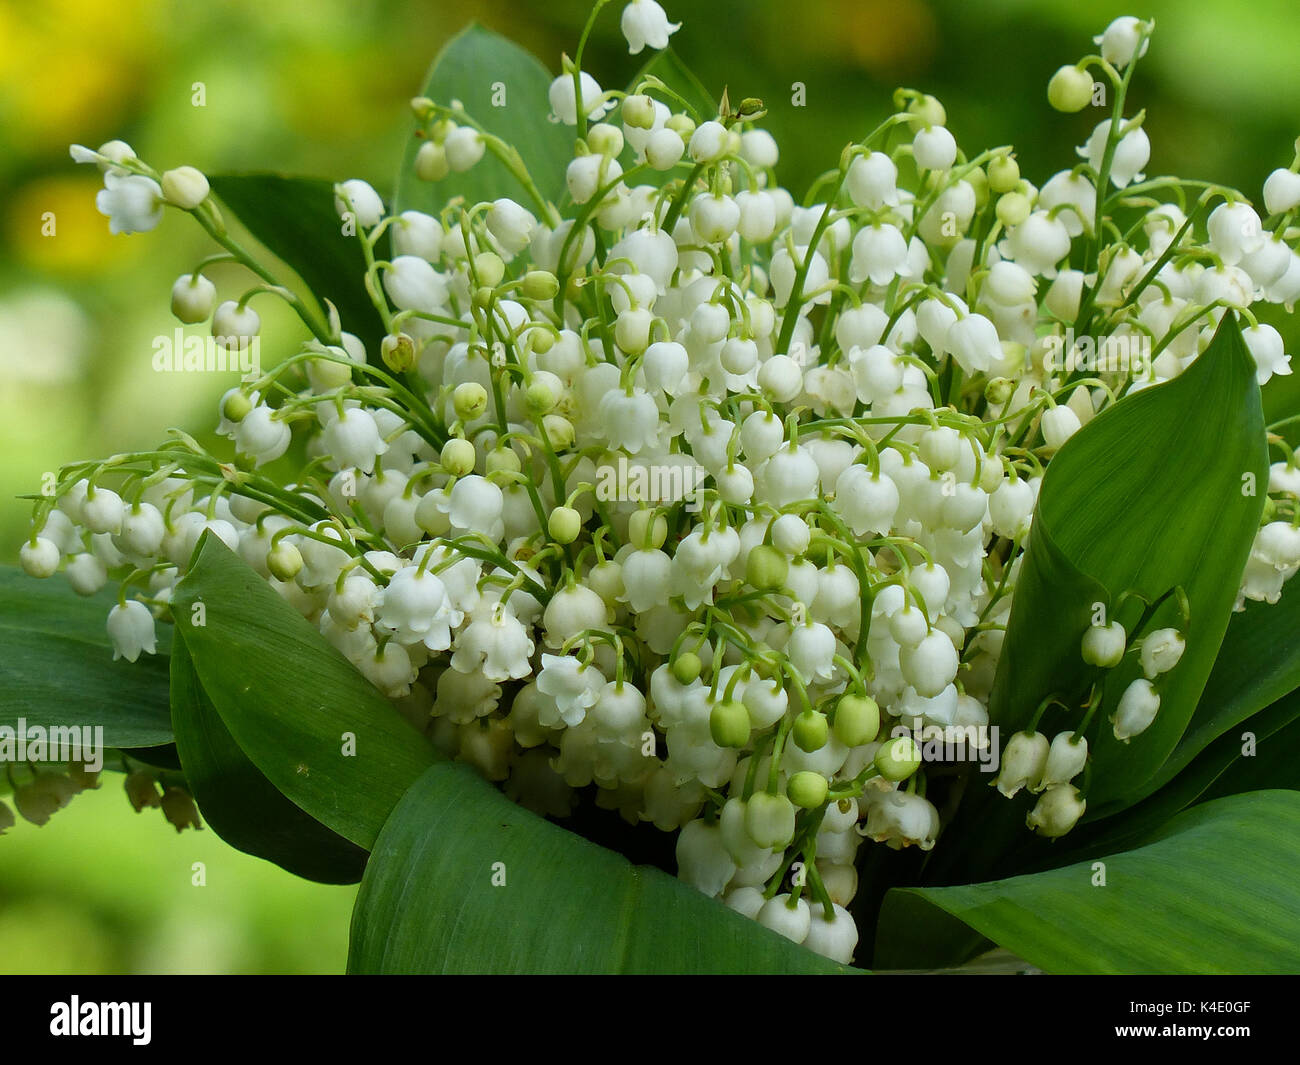 Bunch Of Lilies Of The Valley, Convallaria Majalis, Toxic Plant Stock Photo